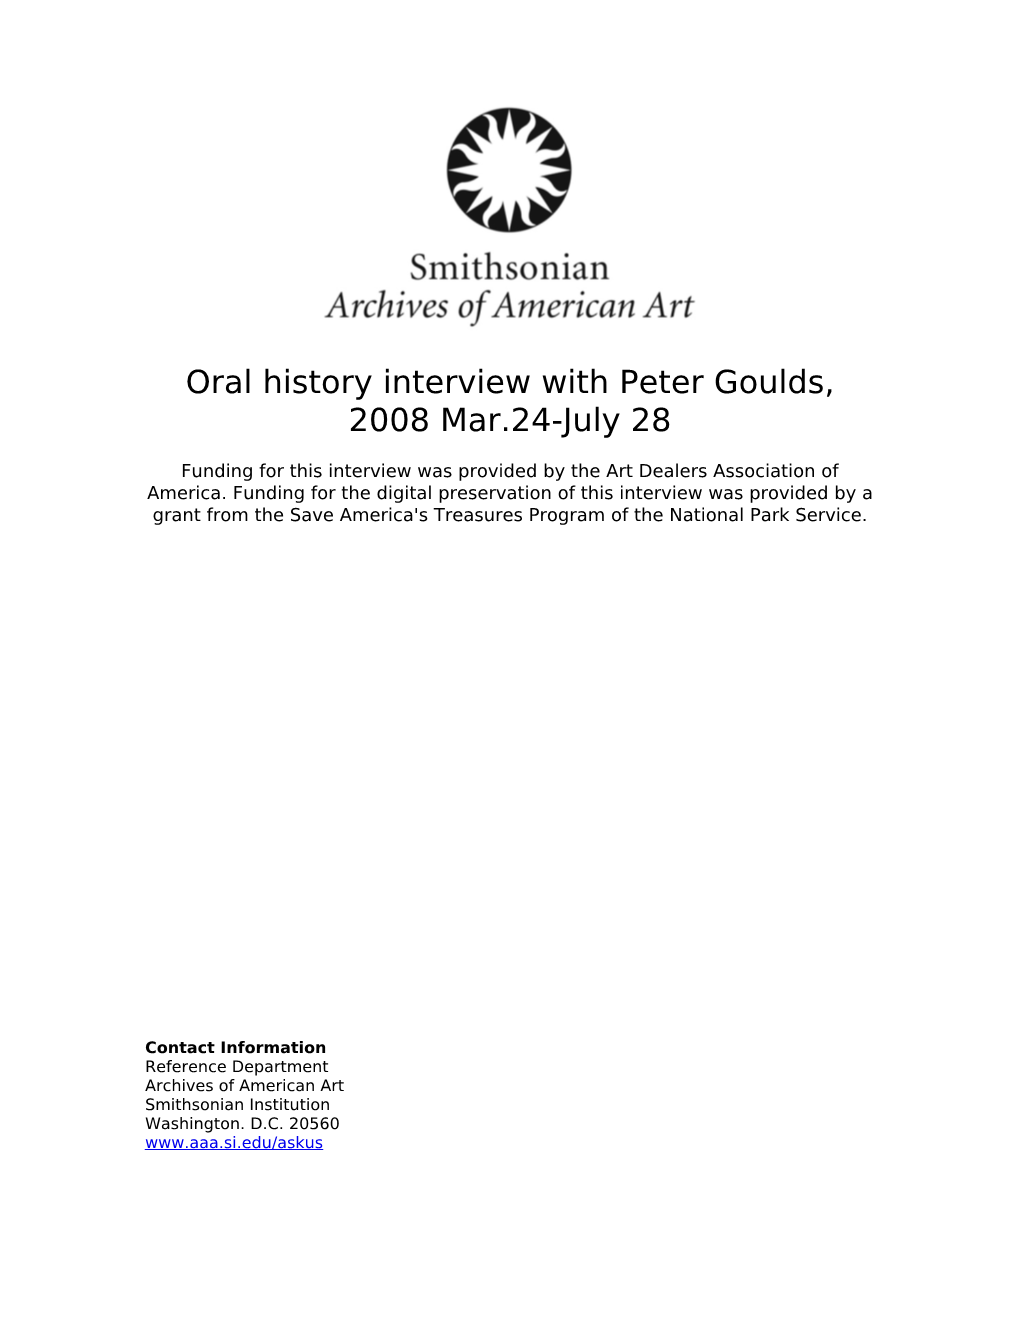 Oral History Interview with Peter Goulds, 2008 Mar.24-July 28